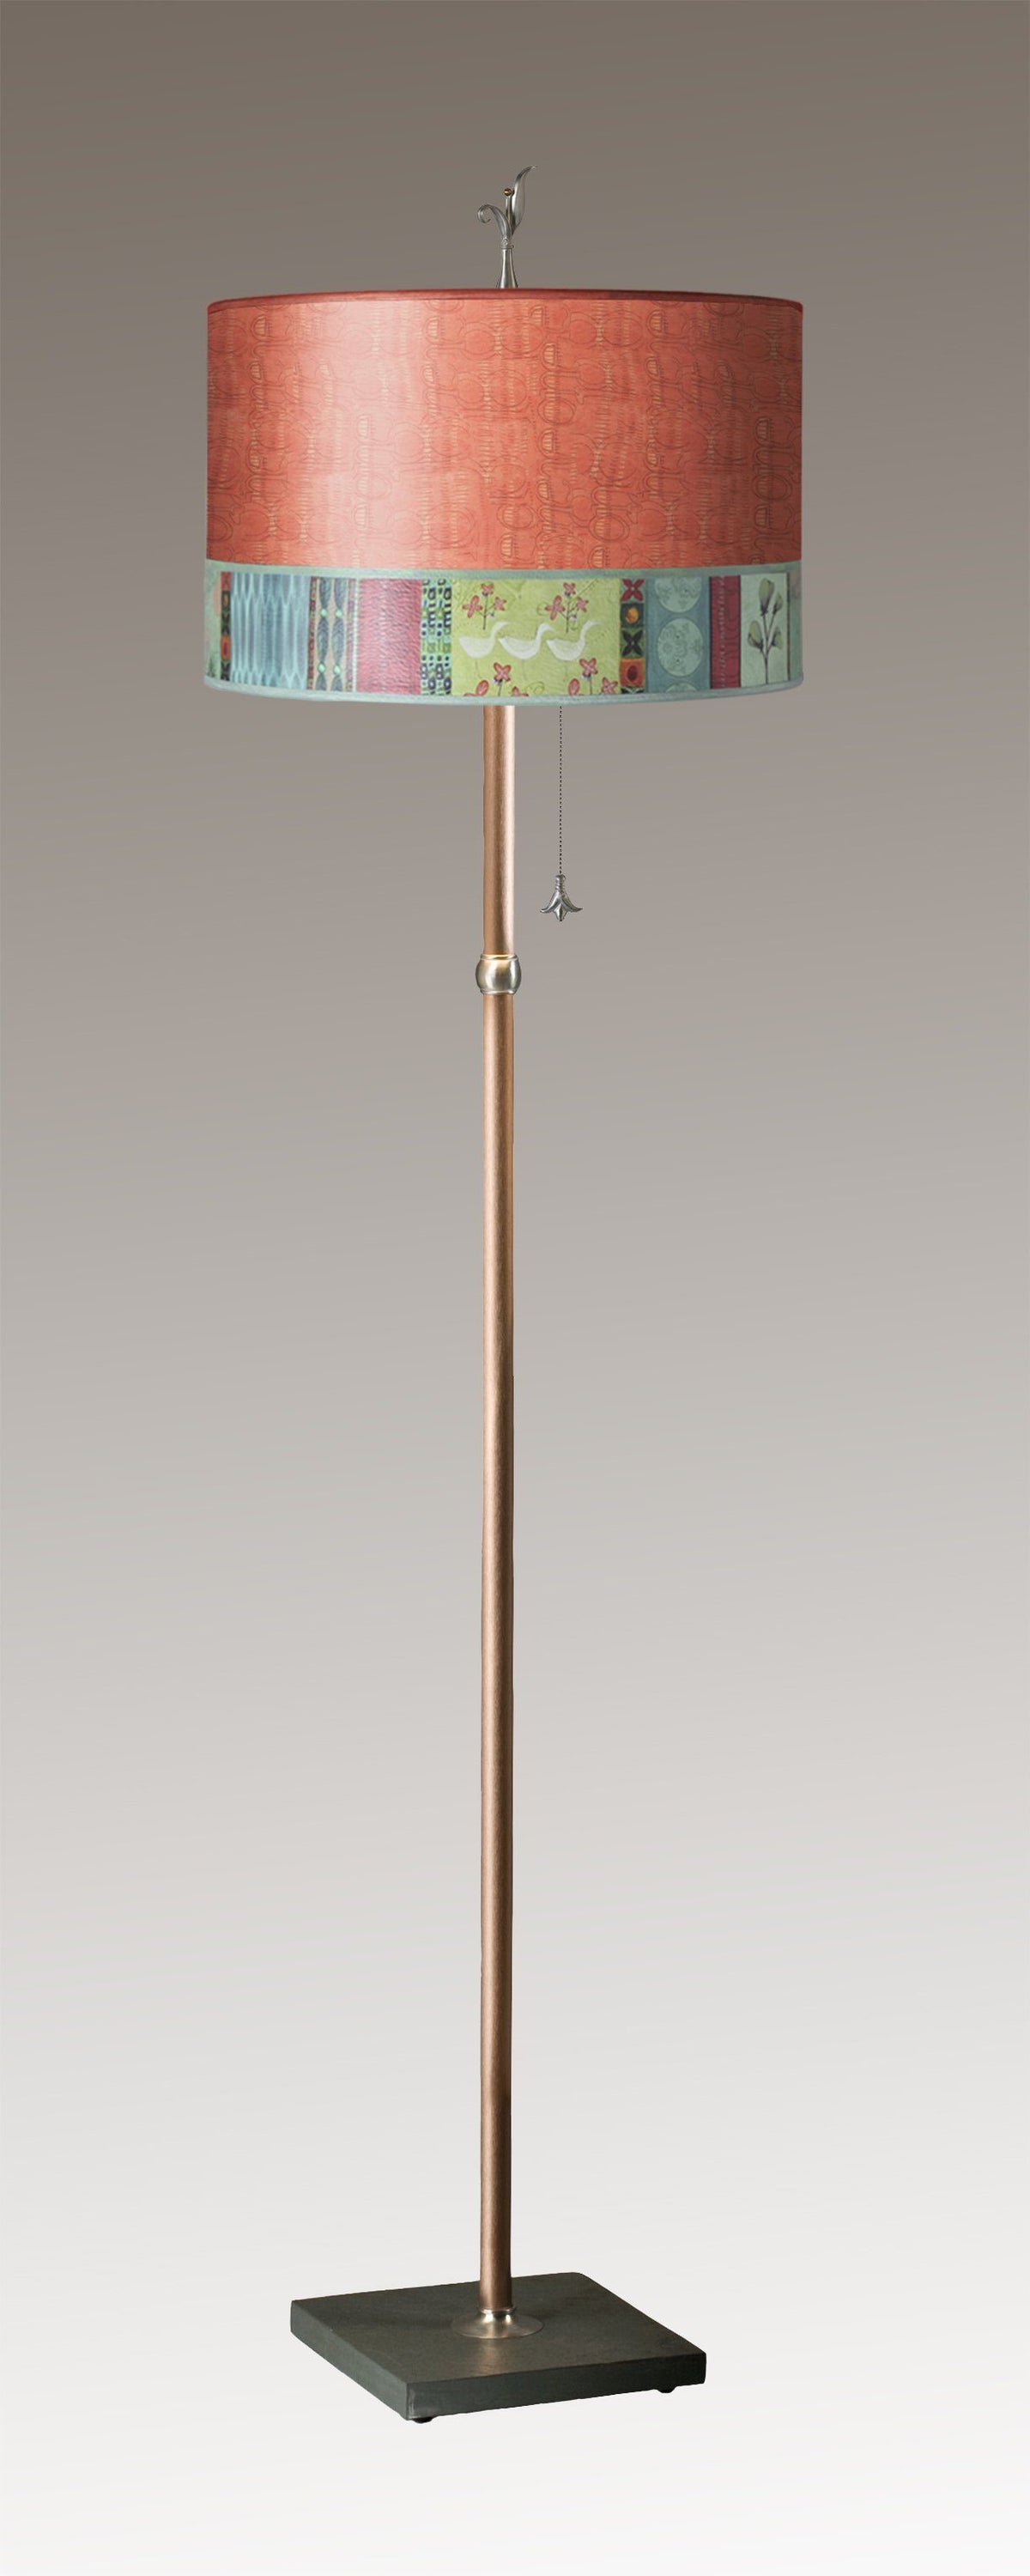 Janna Ugone &amp; Co Floor Lamps Copper Floor Lamp with Large Drum Lampshade in Melody in Coral